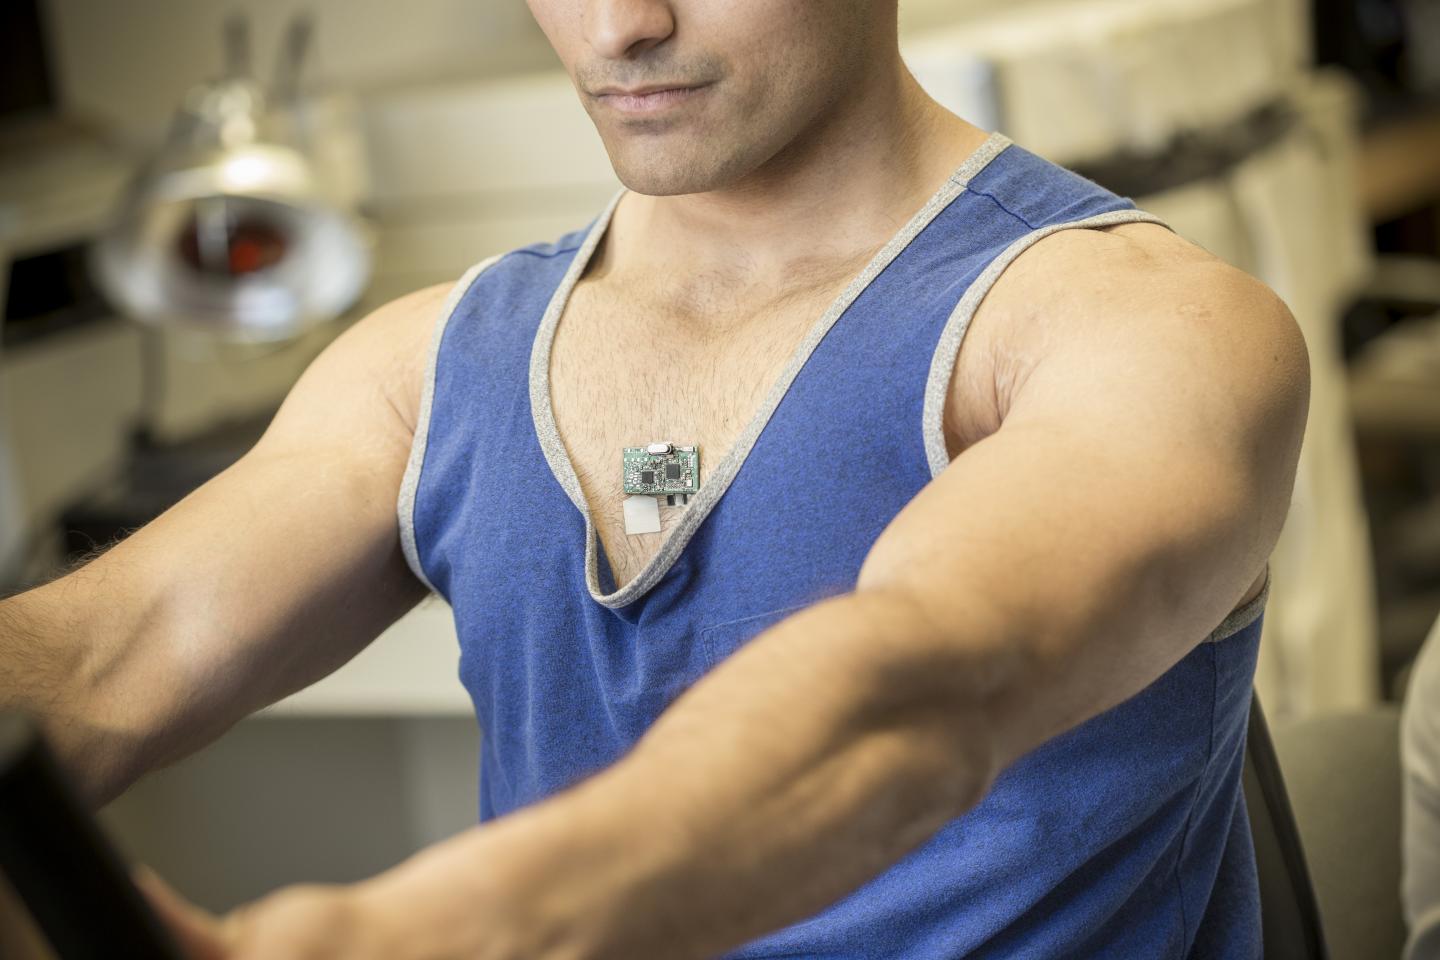 The Patch Can Be Used to Monitor Levels of Fitness and Cardiac Function